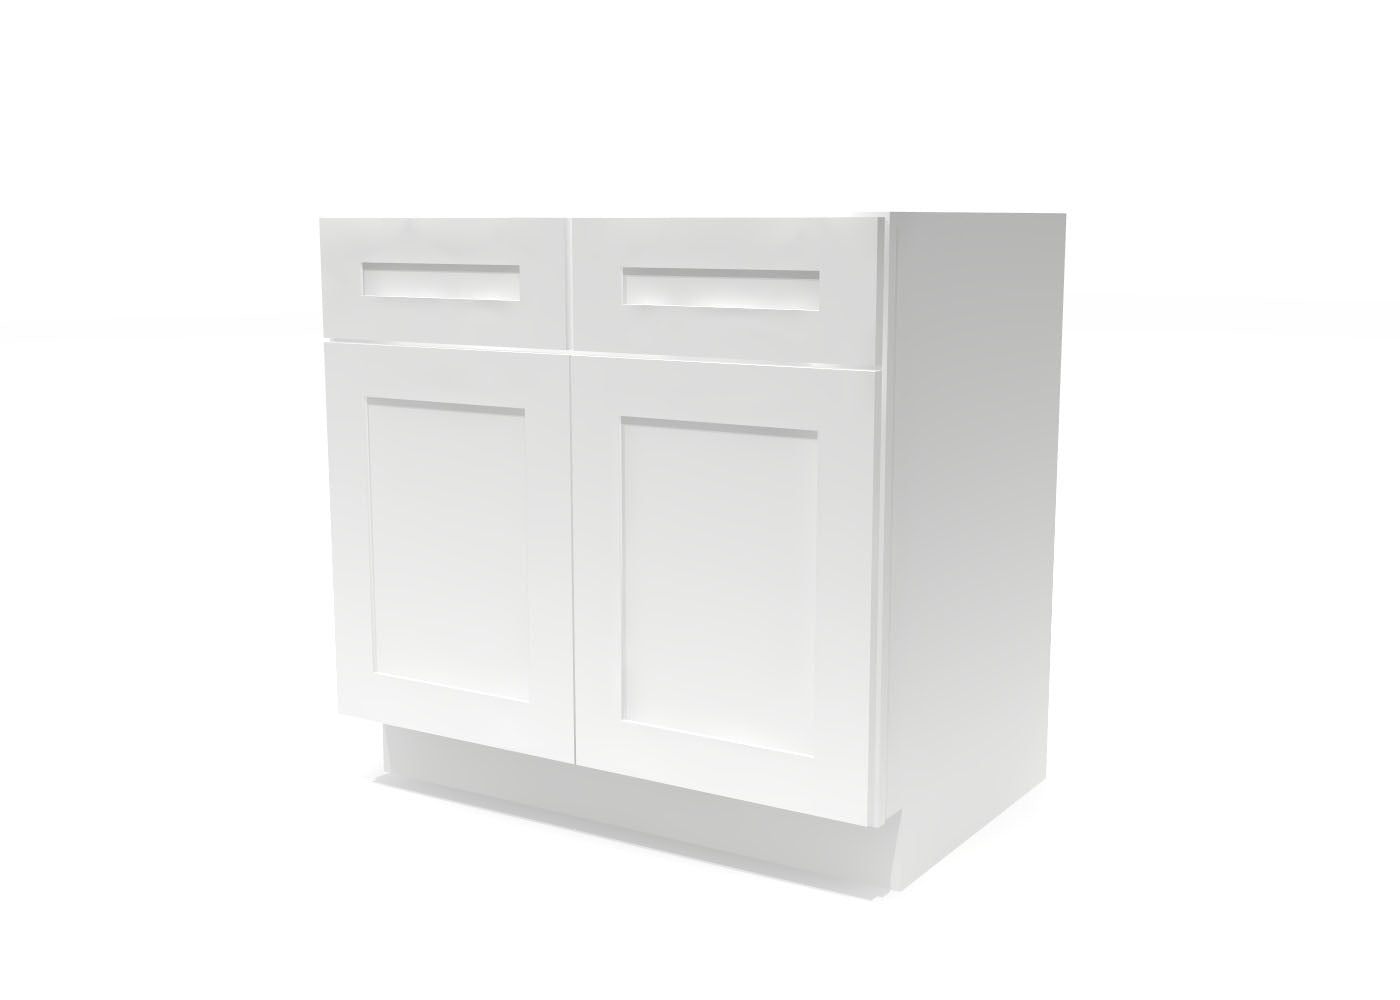 Base Double Door Two Drawers 36" Wide White Shaker Cabinet